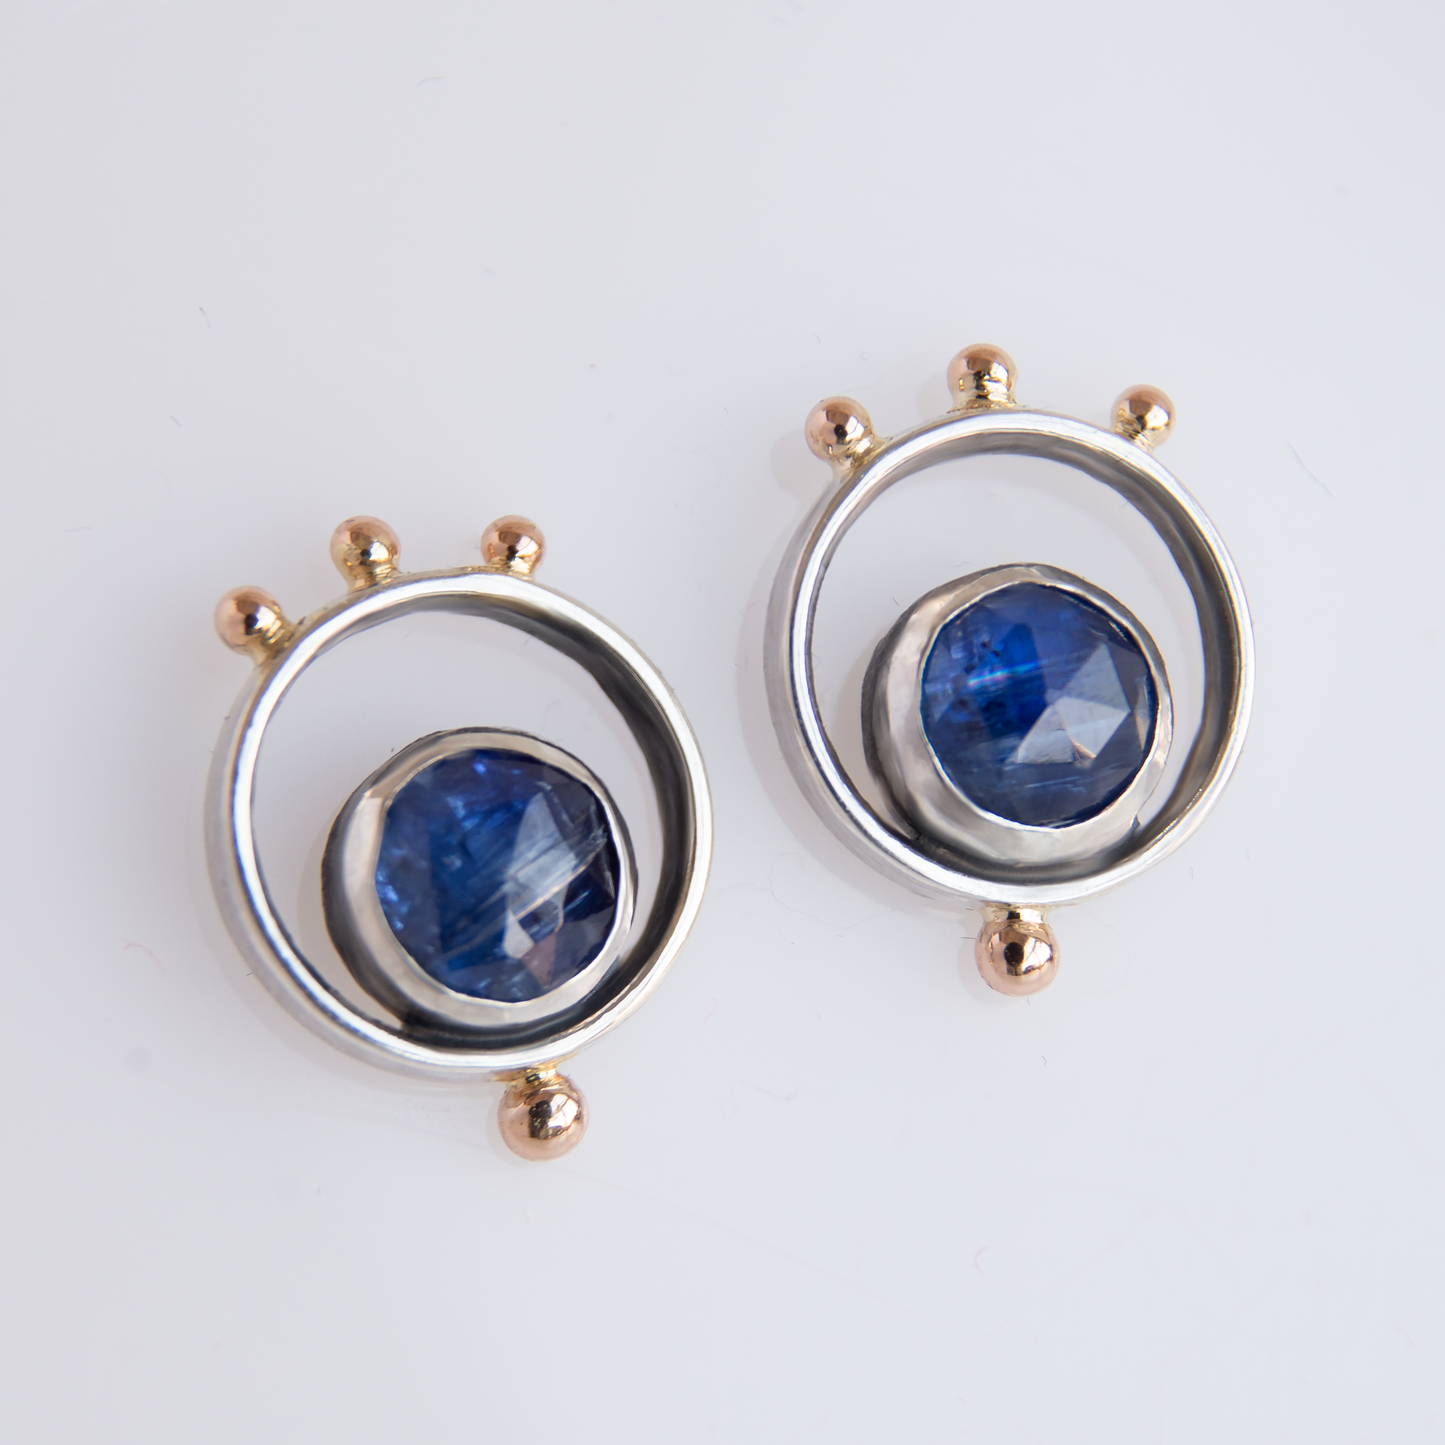 Minimalistic Silver Earrings with 14K Gold beads and Blue Kyanite stones